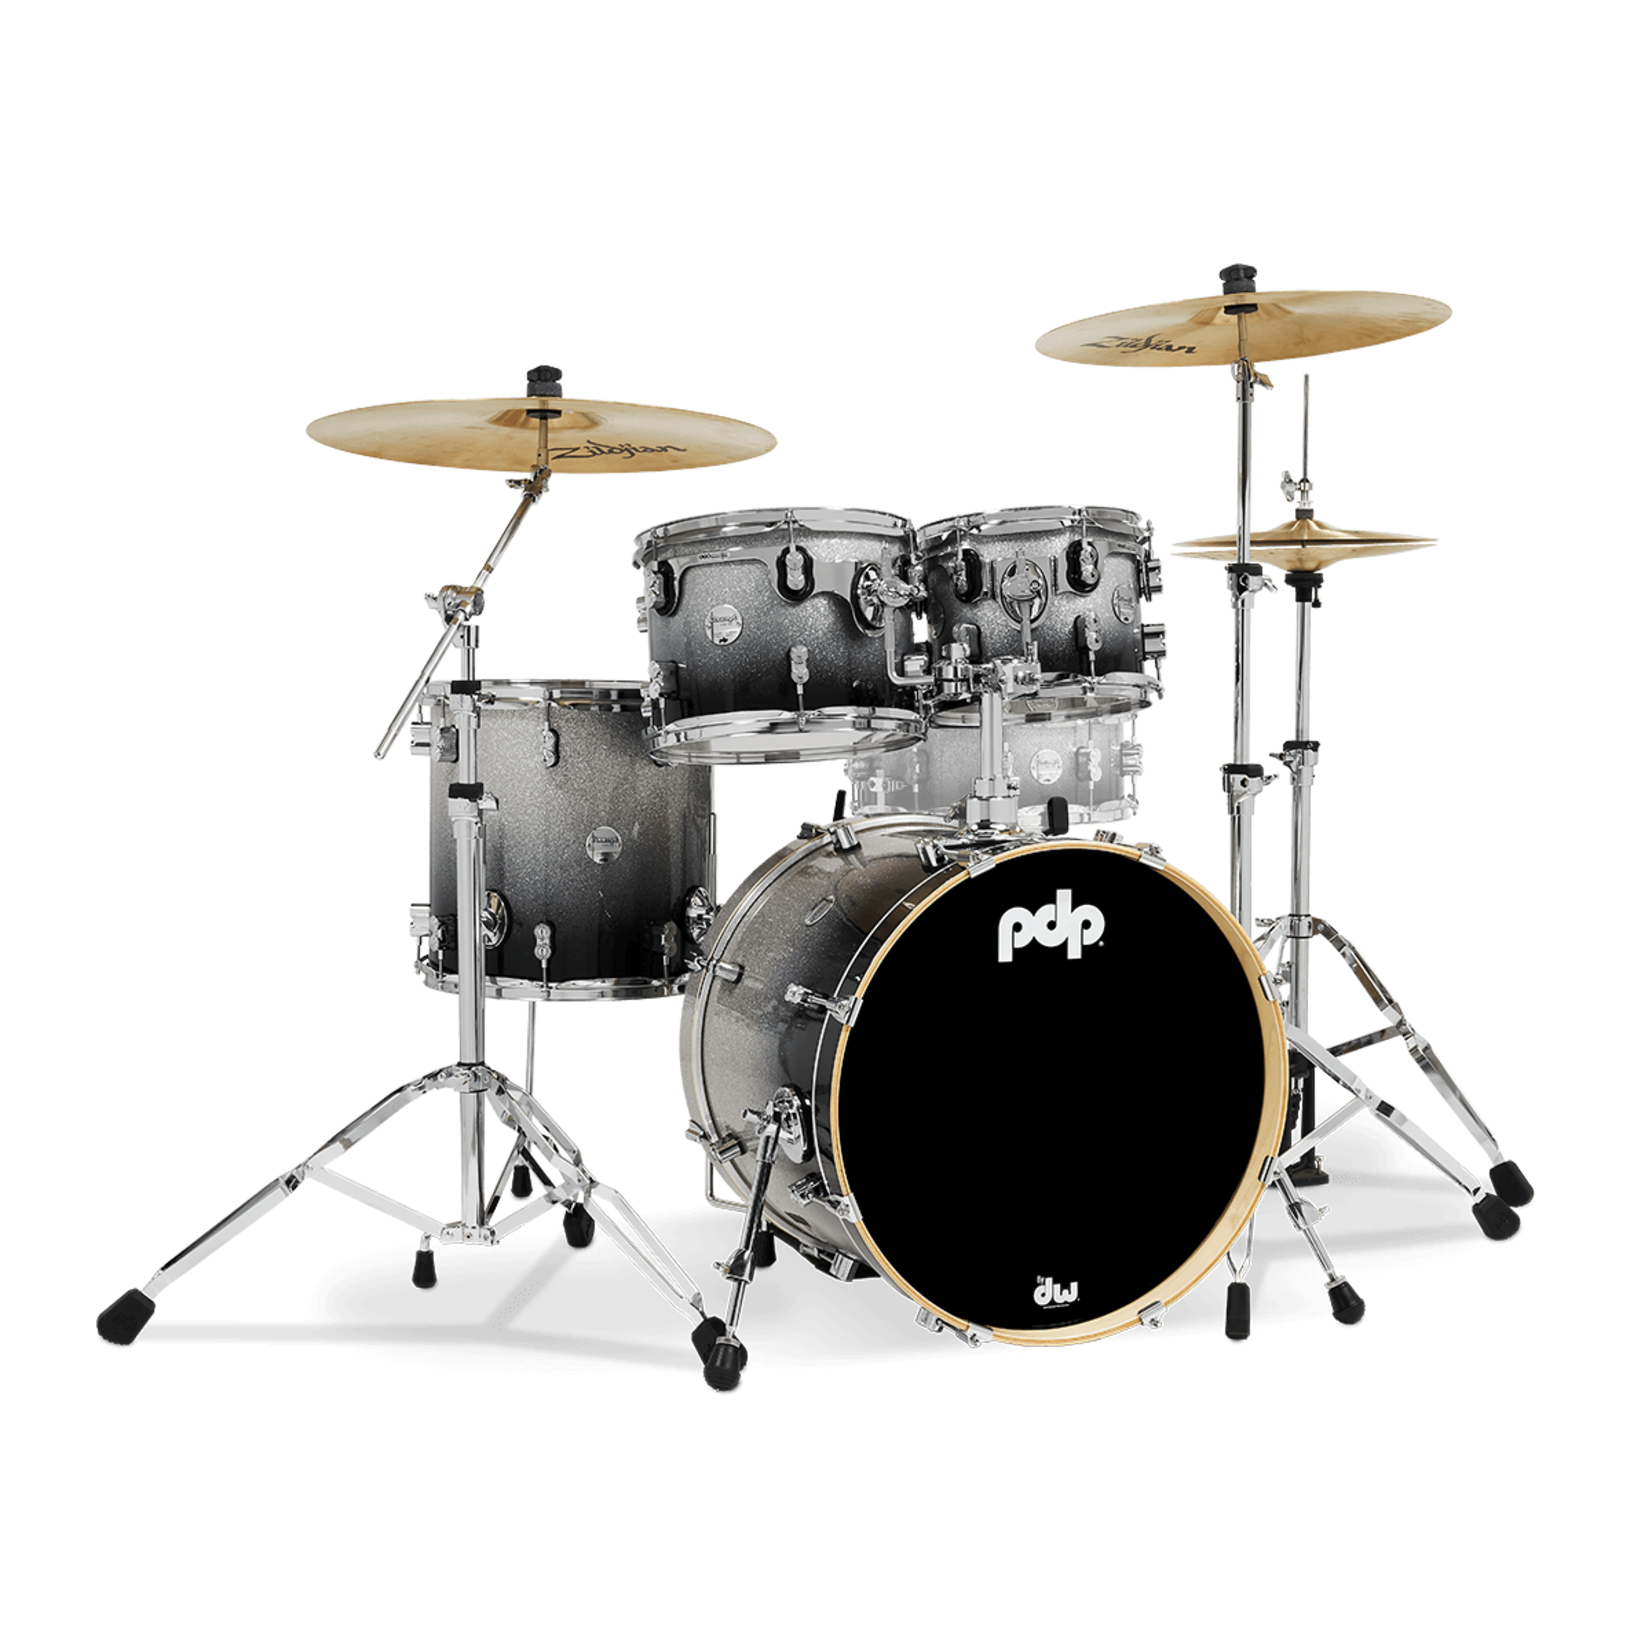 PDP PDP Concept Maple 5pc Drum Kit - "Silver to Black Fade"